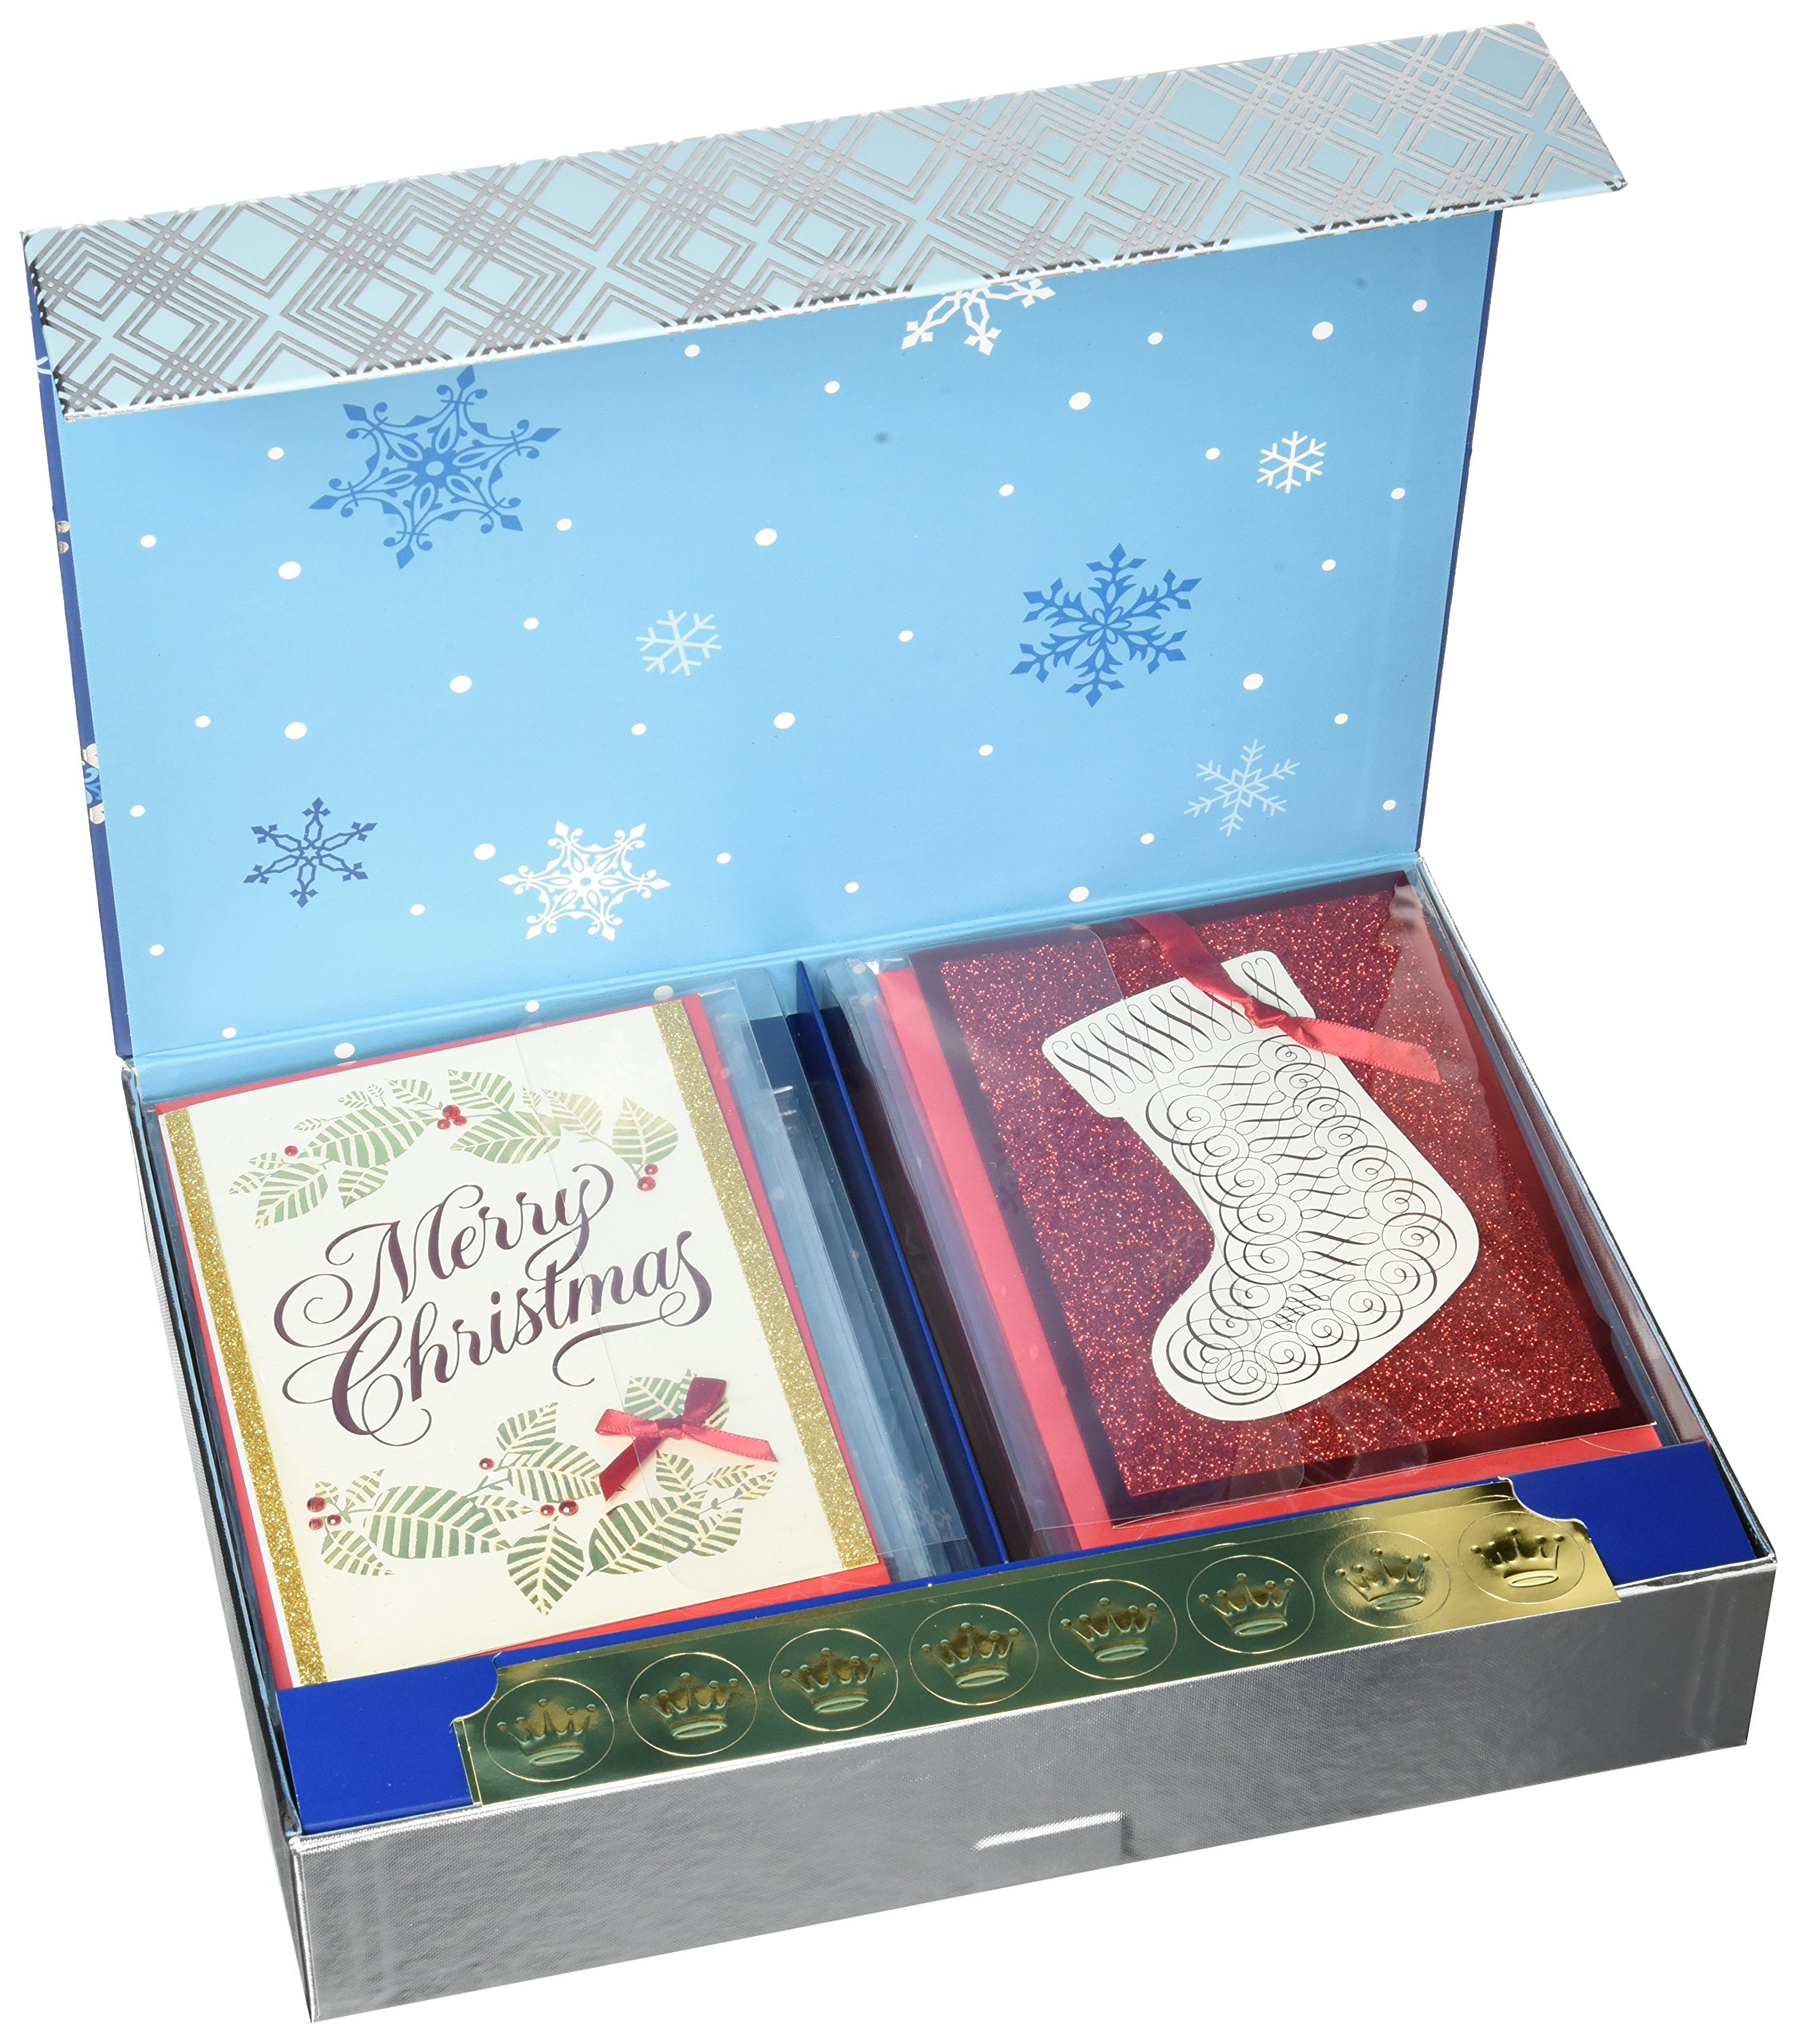 Hallmark Assorted Boxed Christmas Cards Set (Pack of 24 Handmade Holiday Cards with Envelopes)